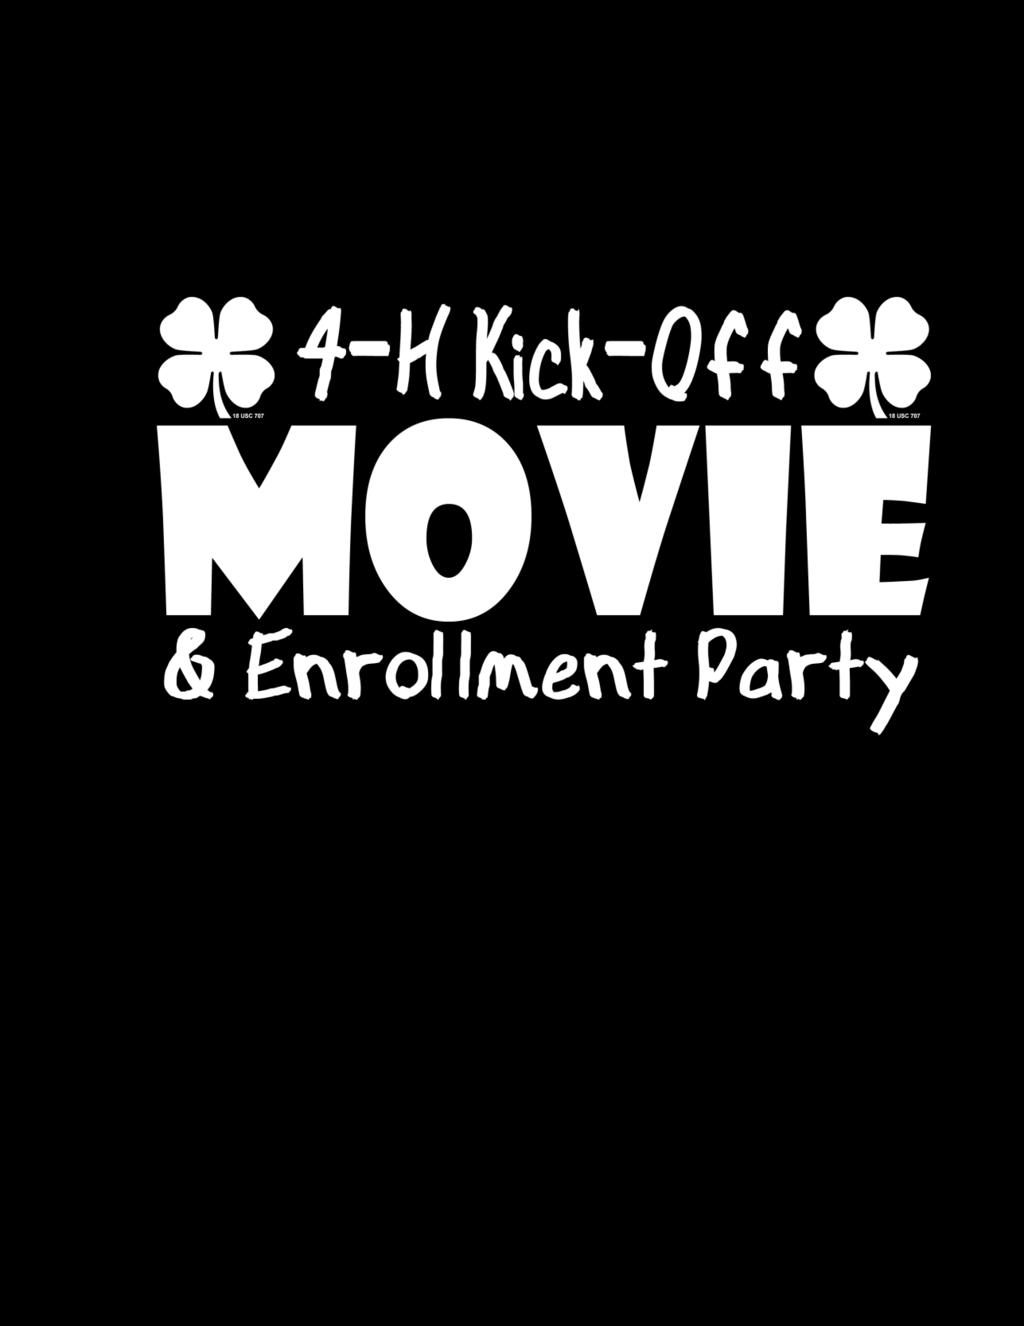 4-H Enrollment Sunday, March 12, @ 2:30 CREST THEATER, SUPERIOR Doors will open at 2:30. Computers will be set up to allow you to register at 4-H Online.